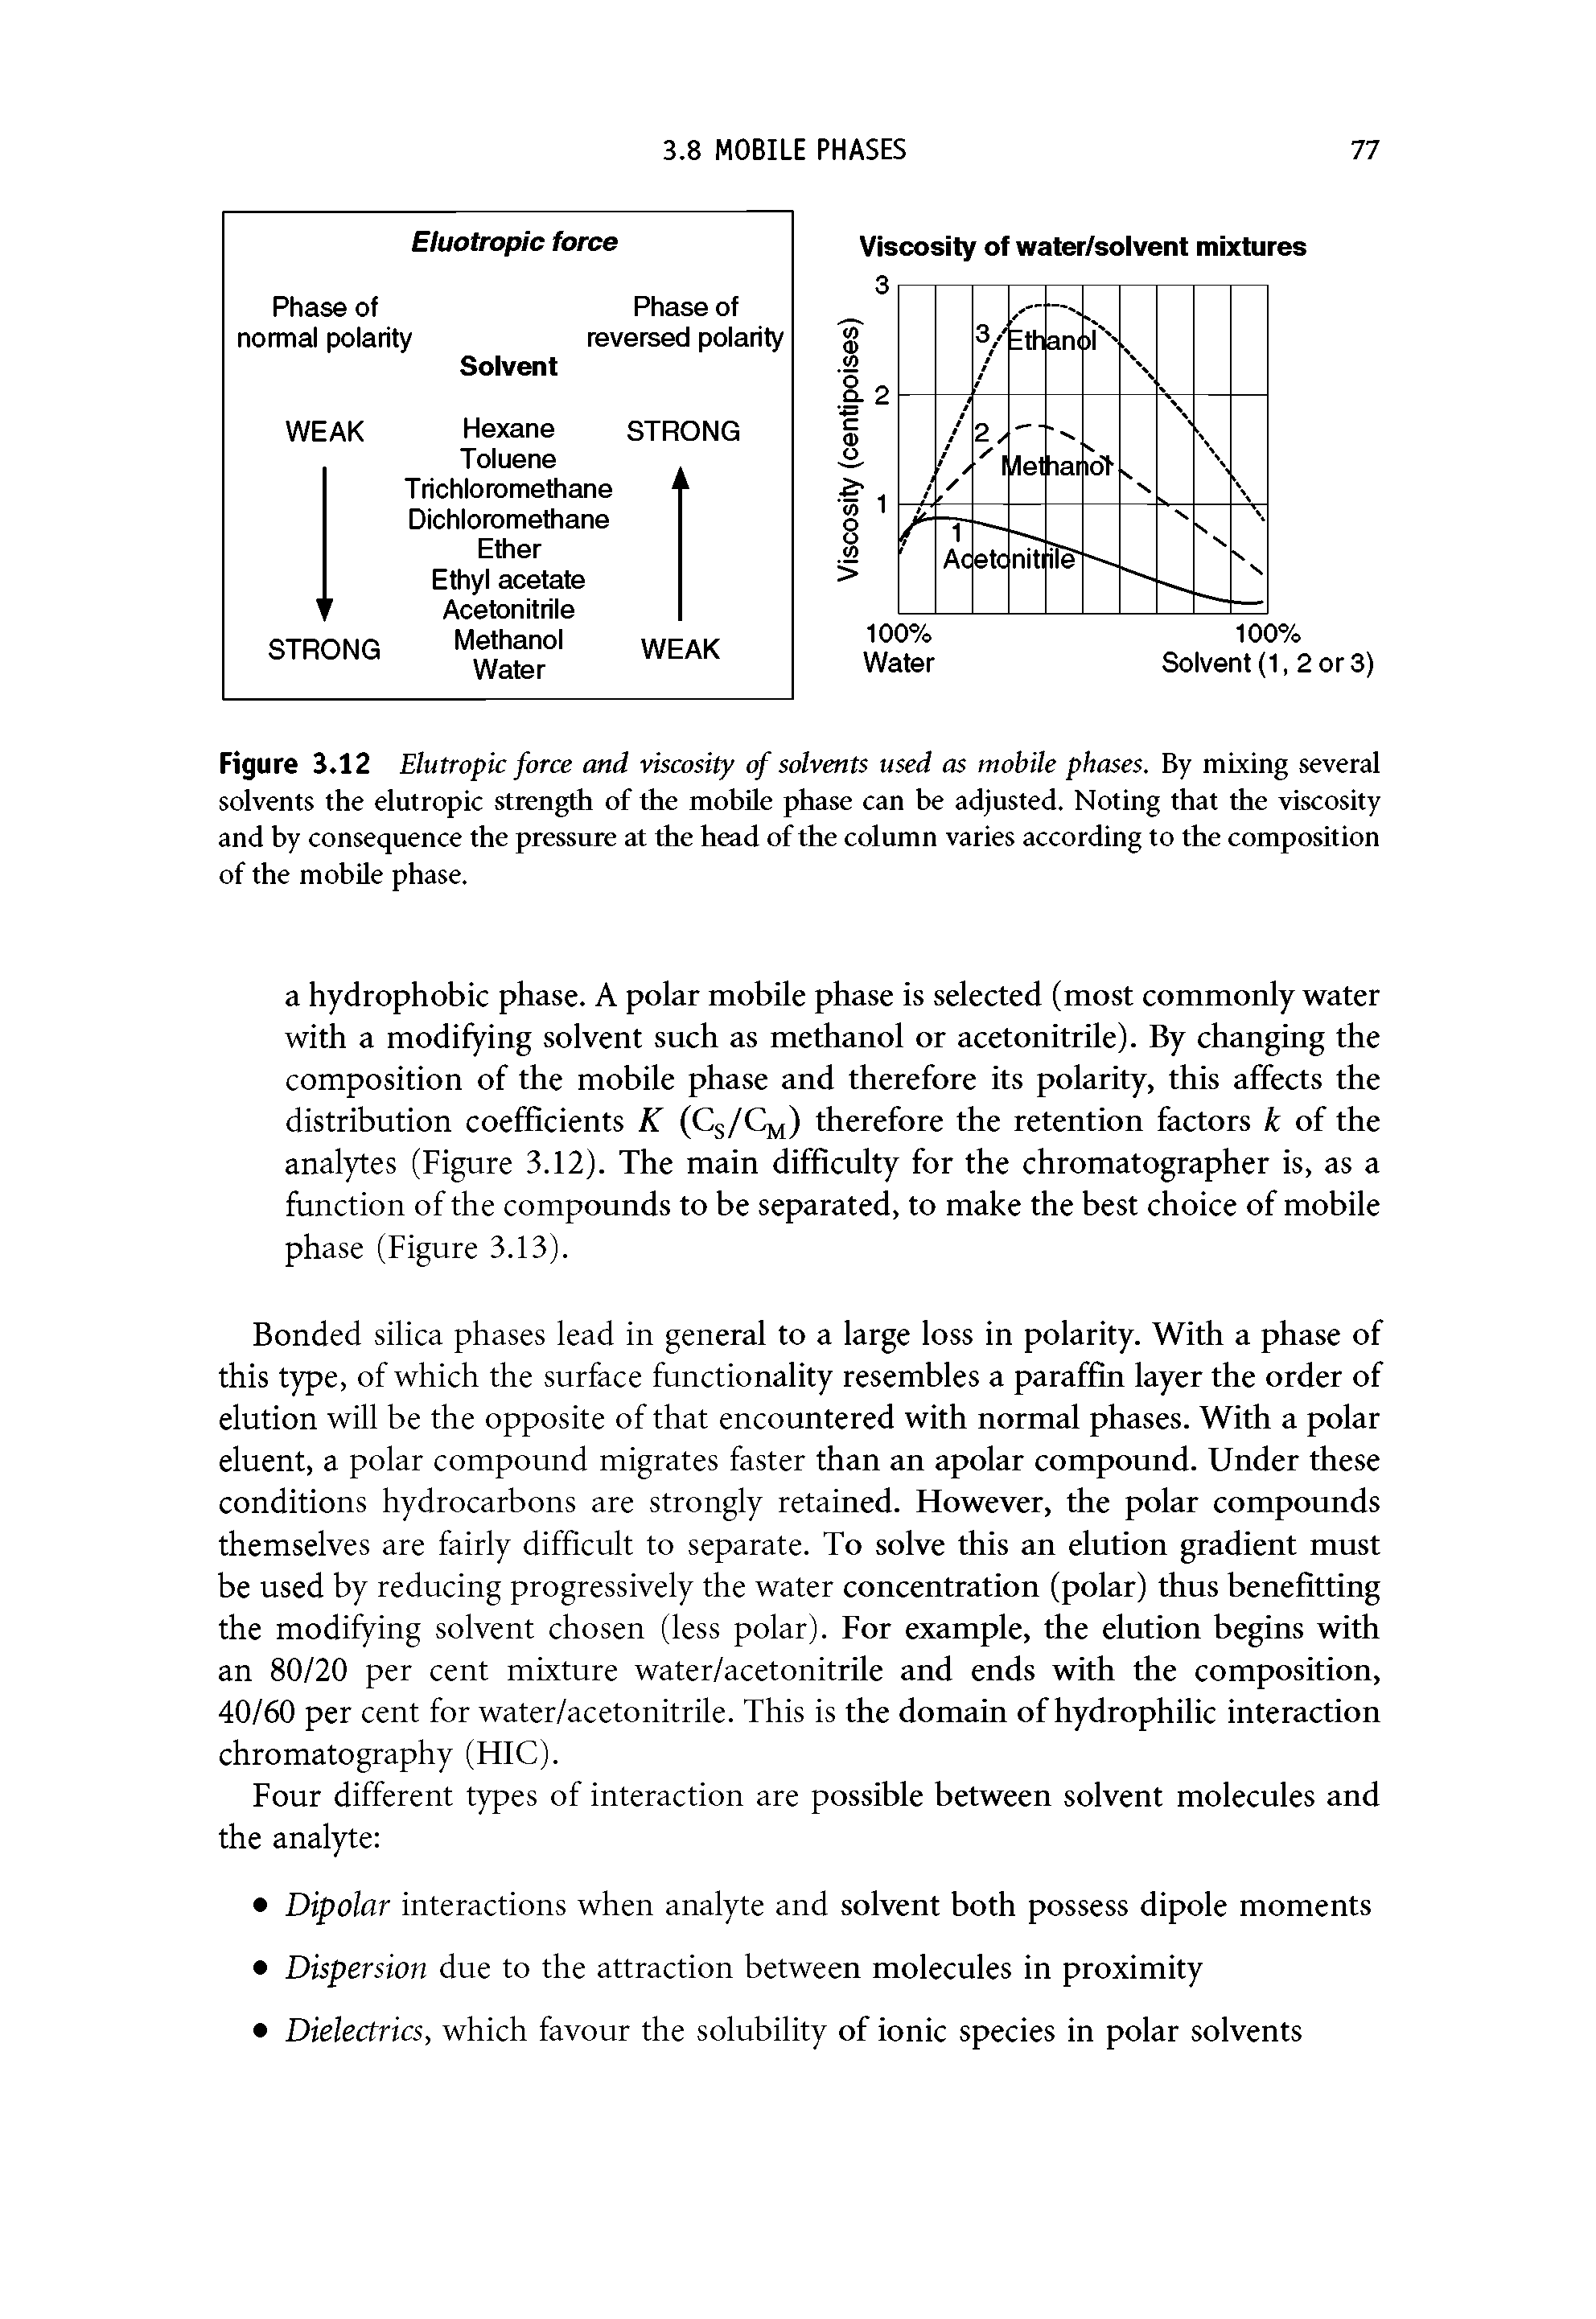 Figure 3.12 Elutropk force and viscosity of solvents used as mobile phases. By mixing several solvents the elutropk strength of the mohUe phase can be adjusted. Noting that the viscosity and by consequence the pressure at the head of the column varies according to the composition of the mobile phase.